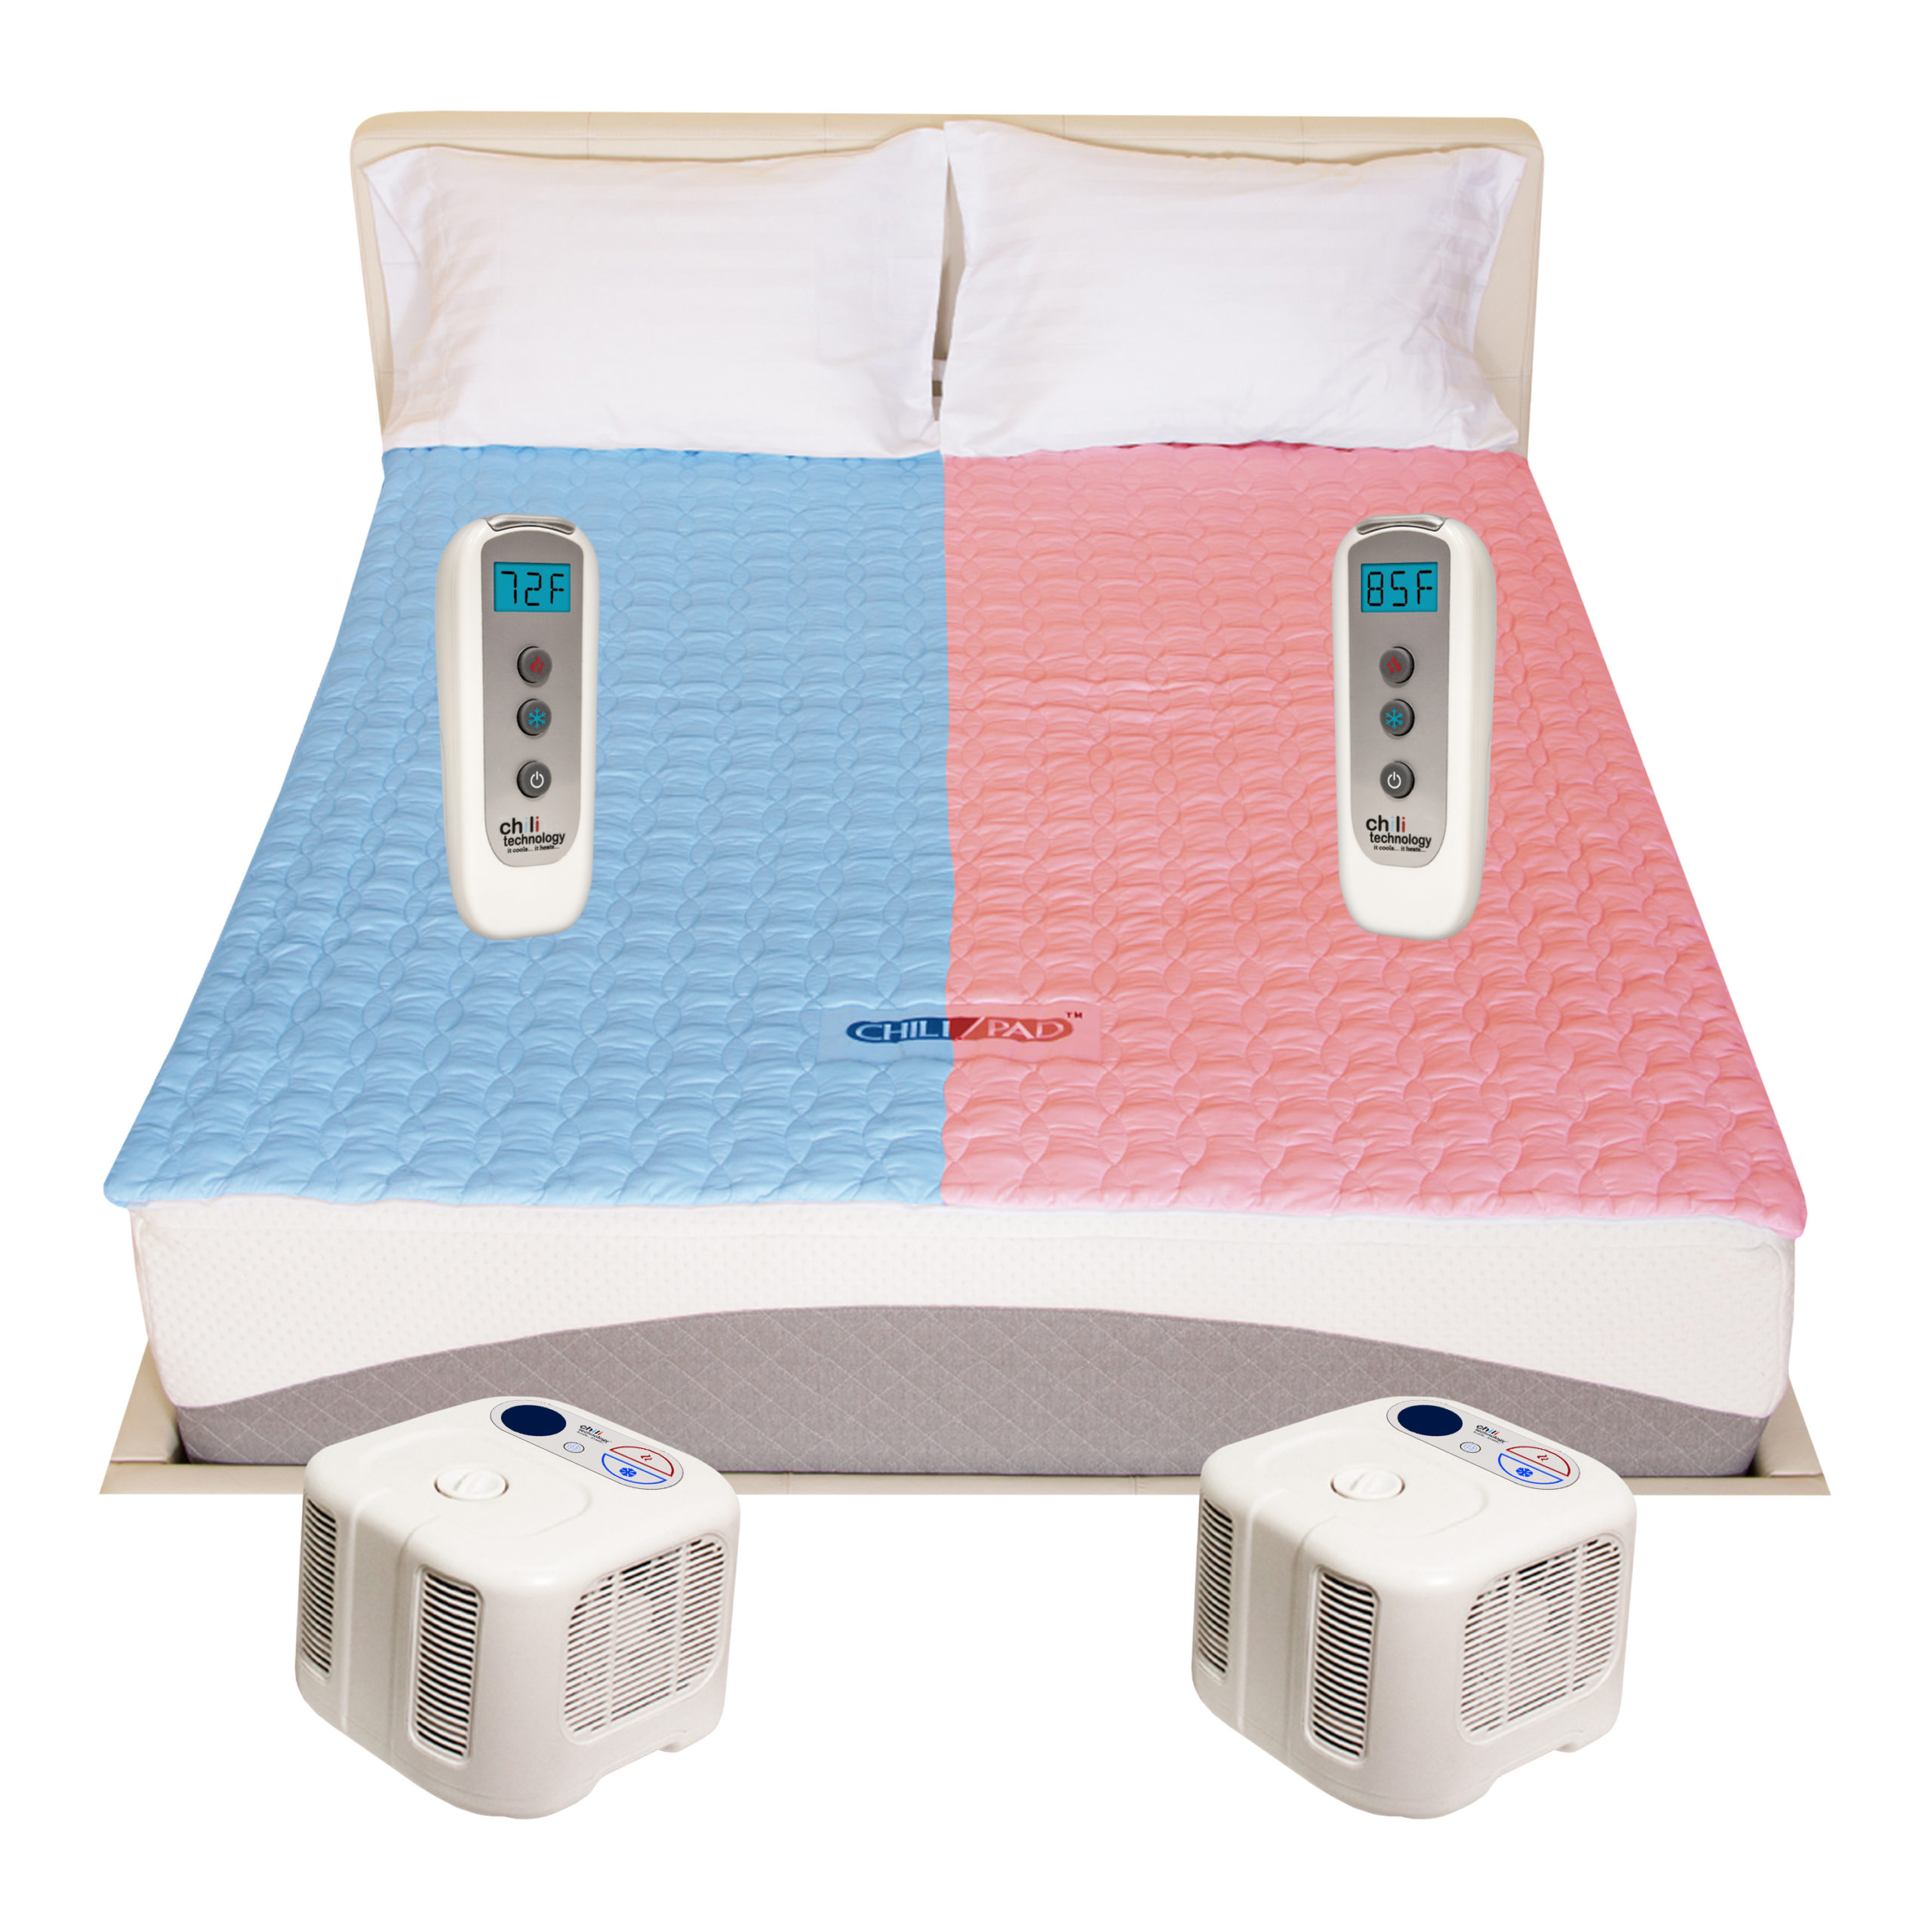 Talkable.com - Chilipad|Temperature|Mattress|Cube|Sleep|Bed|Water|System|Pad|Ooler|Control|Unit|Night|Bedjet|Technology|Side|Air|Product|Review|Body|Time|Degrees|Noise|Price|Pod|Tubes|Heat|Device|Cooling|Room|King|App|Features|Size|Cover|Sleepers|Sheets|Energy|Warranty|Quality|Mattress Pad|Control Unit|Cube Sleep System|Sleep Pod|Distilled Water|Remote Control|Sleep System|Desired Temperature|Water Tank|Chilipad Cube|Chili Technology|Deep Sleep|Pro Cover|Ooler Sleep System|Hydrogen Peroxide|Cool Mesh|Sleep Temperature|Fitted Sheet|Pod Pro|Sleep Quality|Smartphone App|Sleep Systems|Chilipad Sleep System|New Mattress|Sleep Trial|Full Refund|Mattress Topper|Body Heat|Air Flow|Chilipad Review